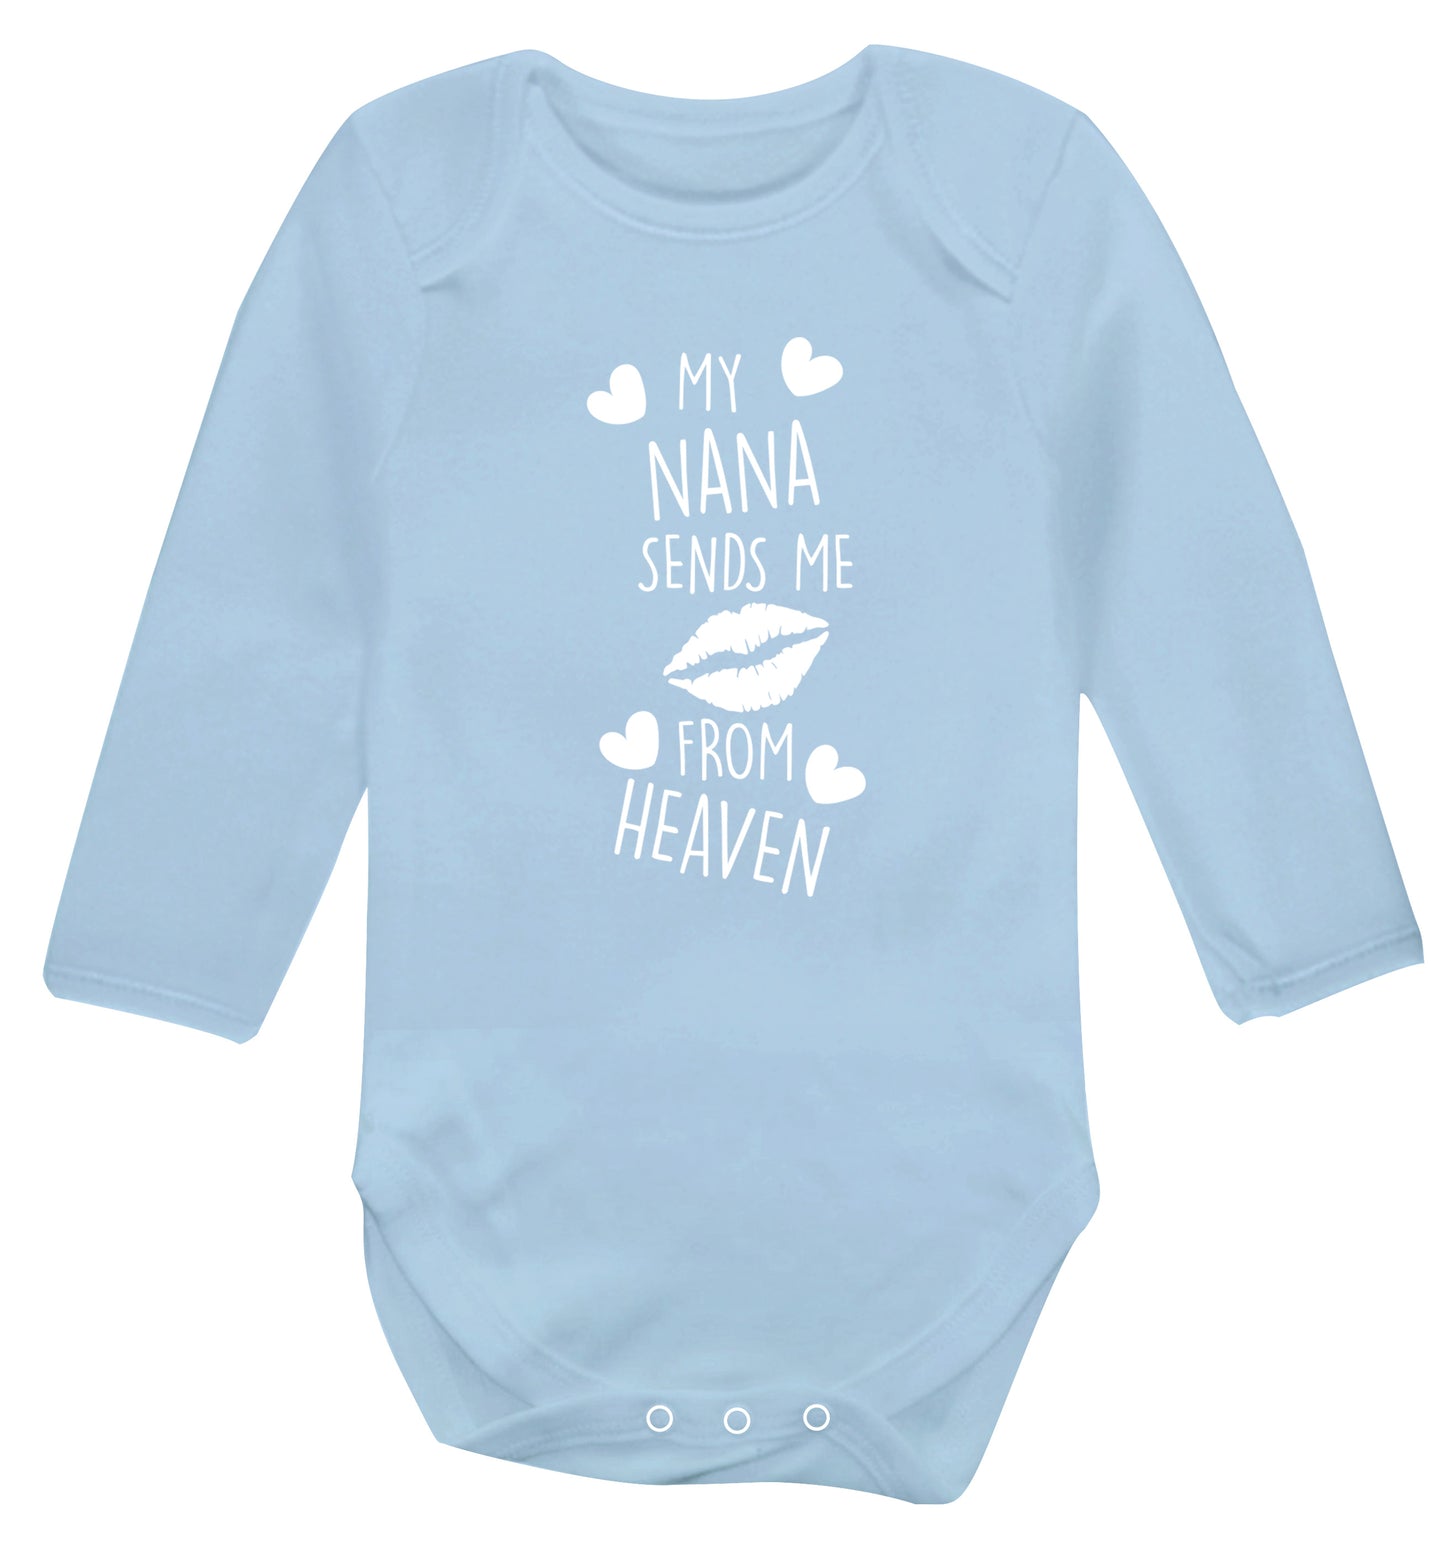 My nana sends me kisses from heaven Baby Vest long sleeved pale blue 6-12 months